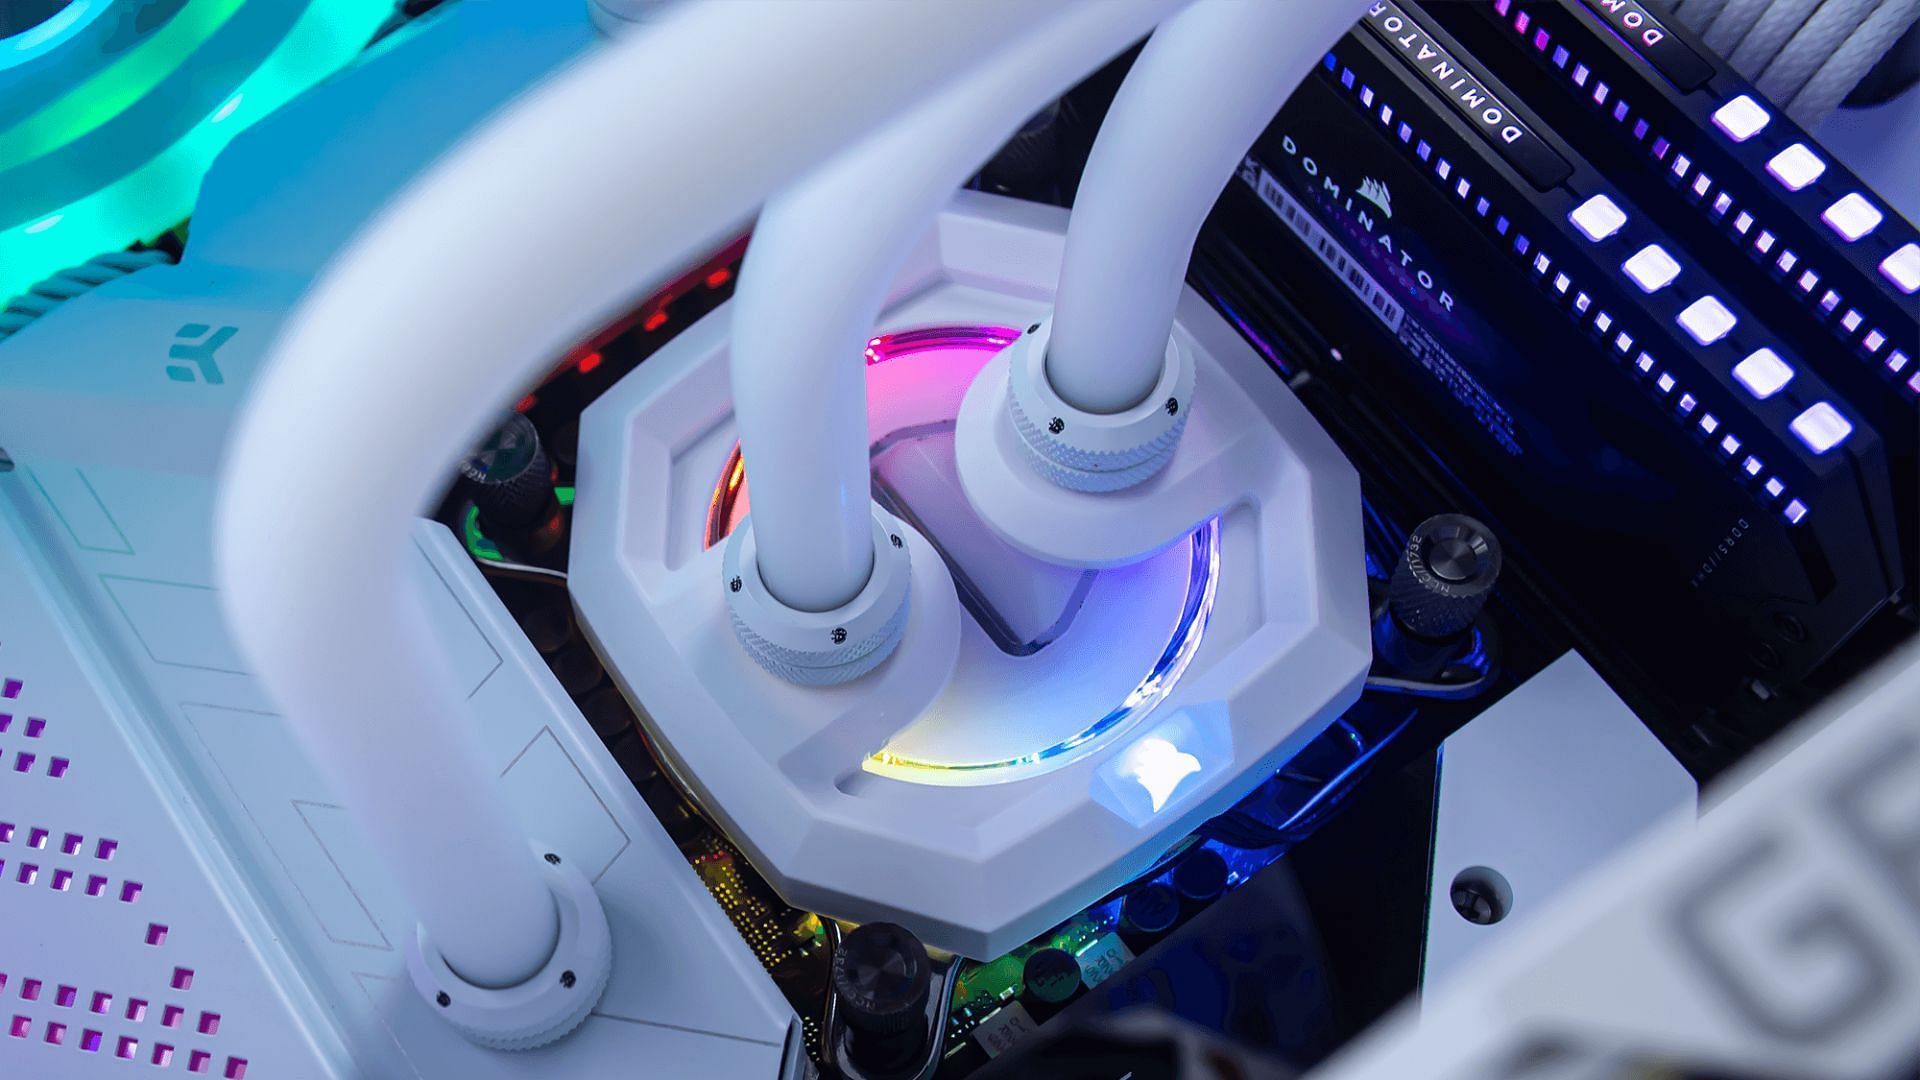 A custom water cooling system for gaming PCs (Image via ASUS)